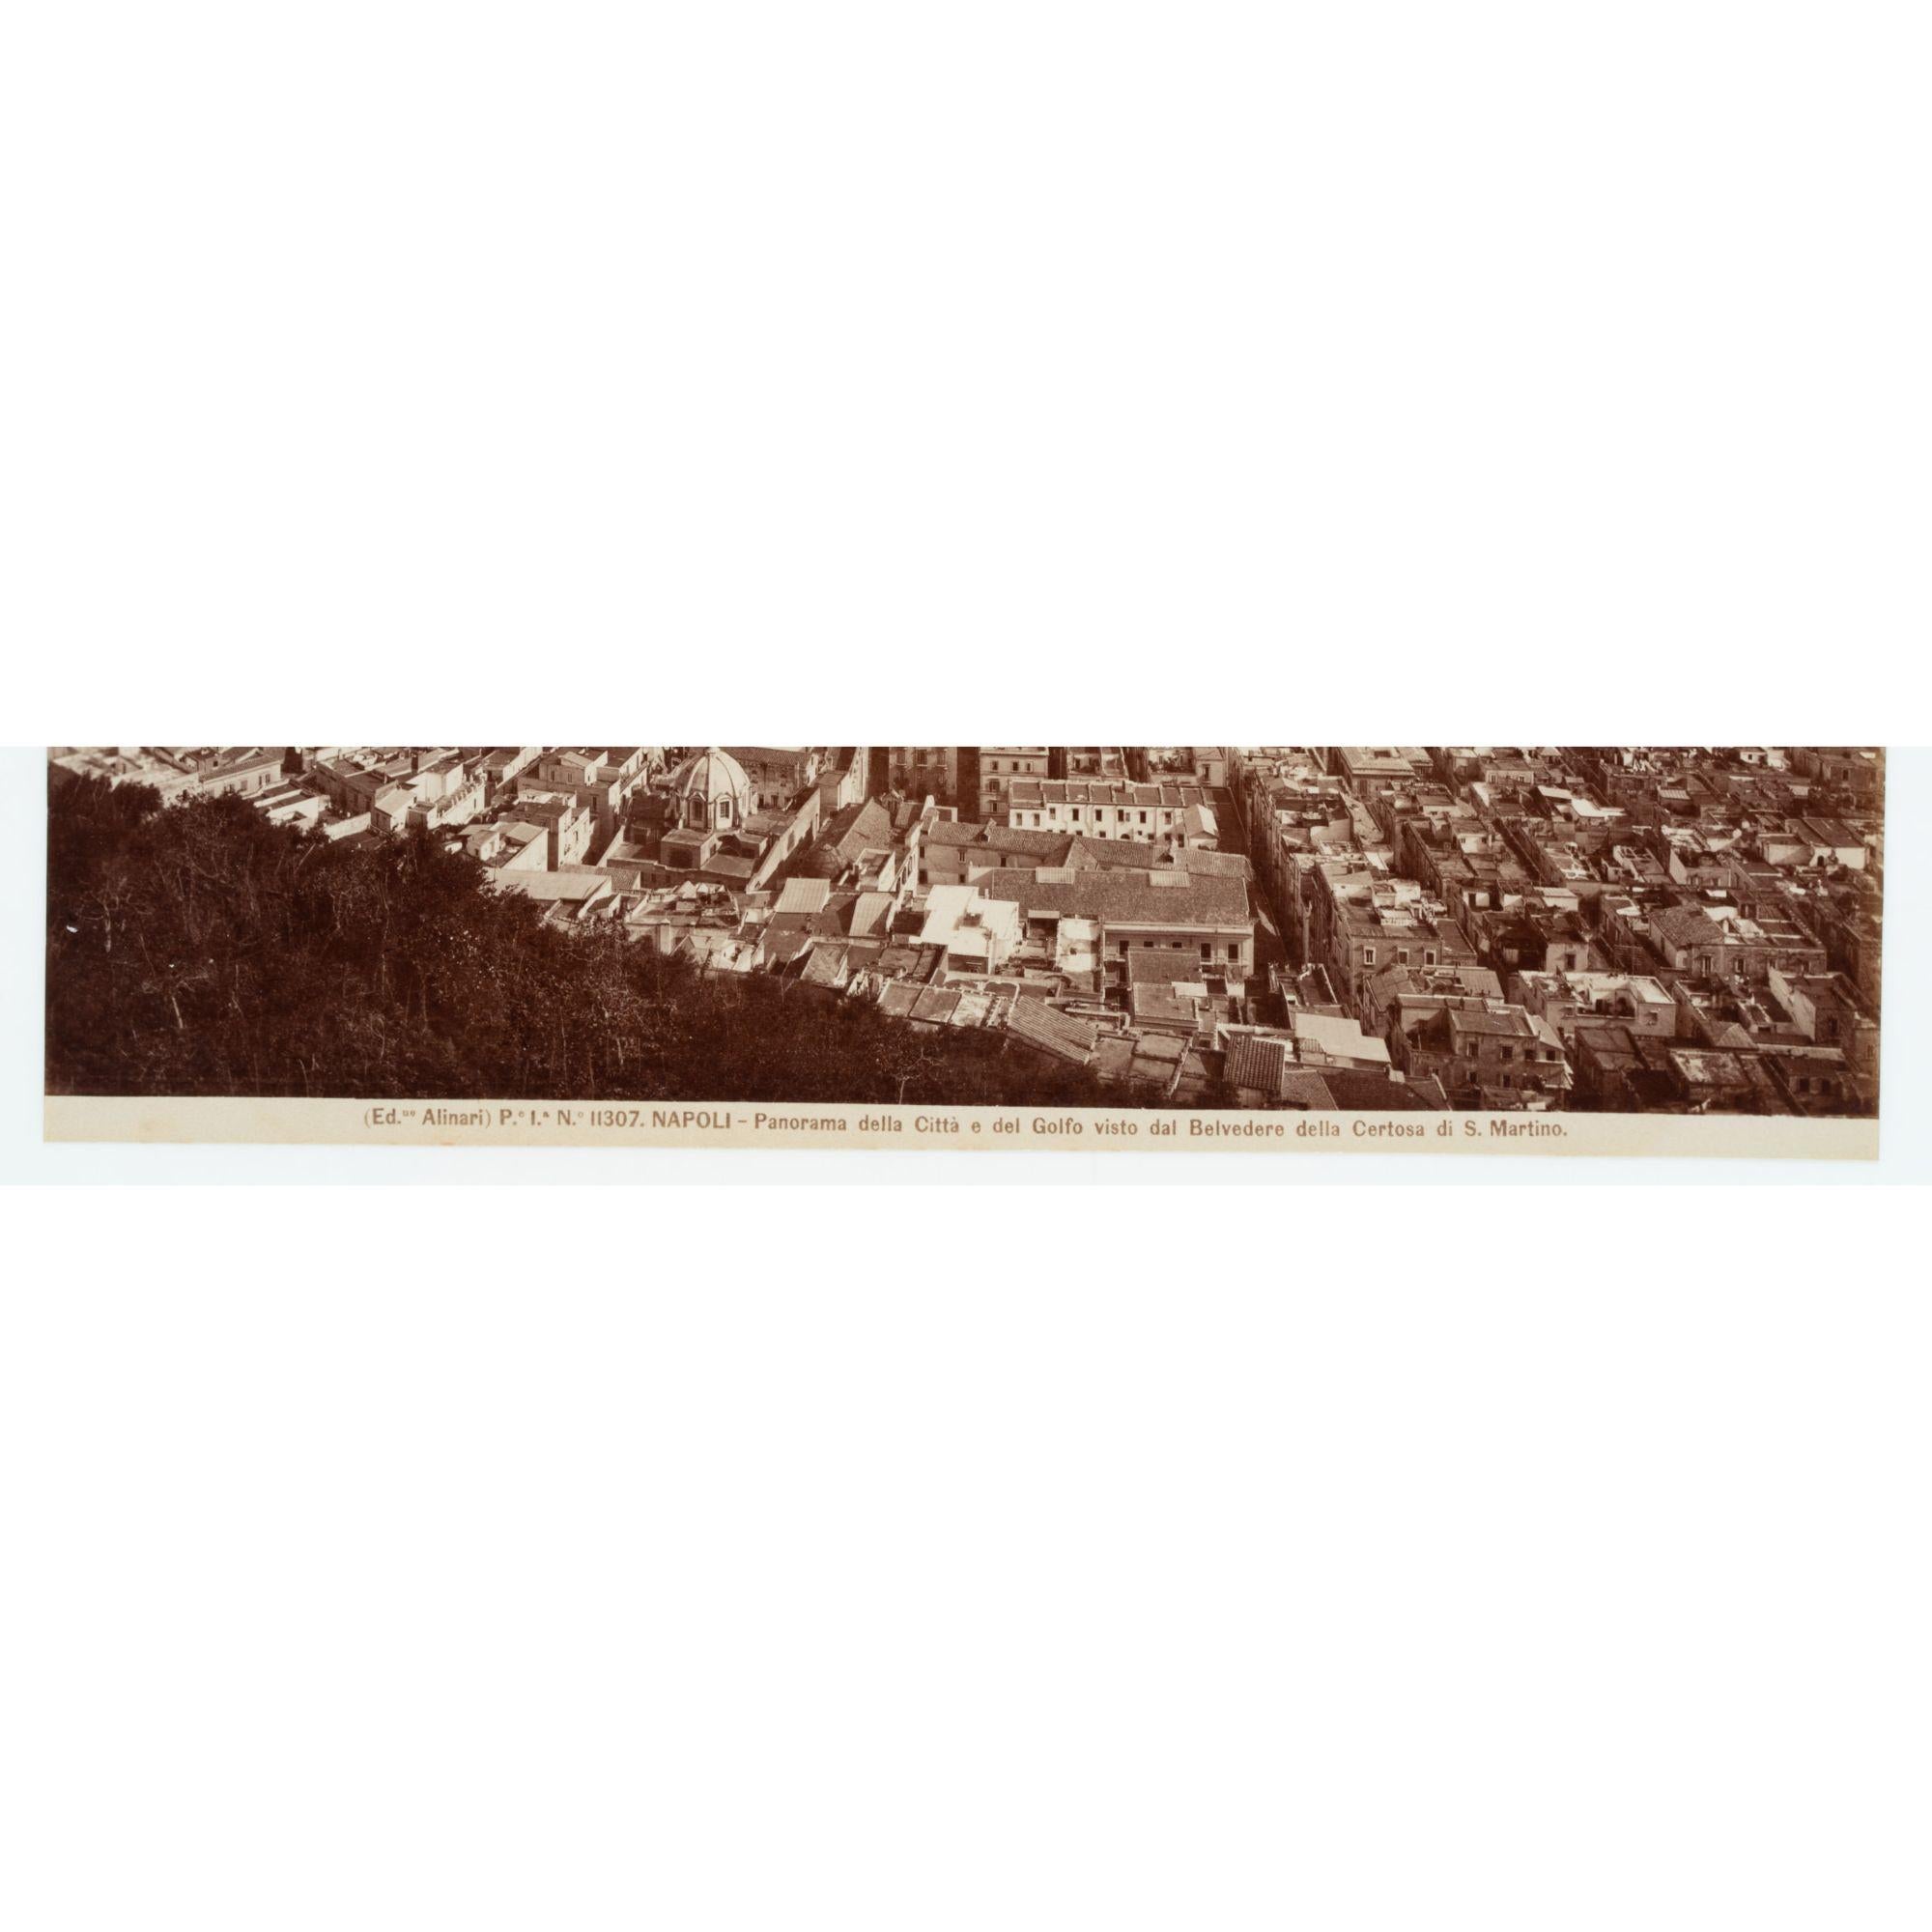 Panorama of Naples and Coast For Sale 1